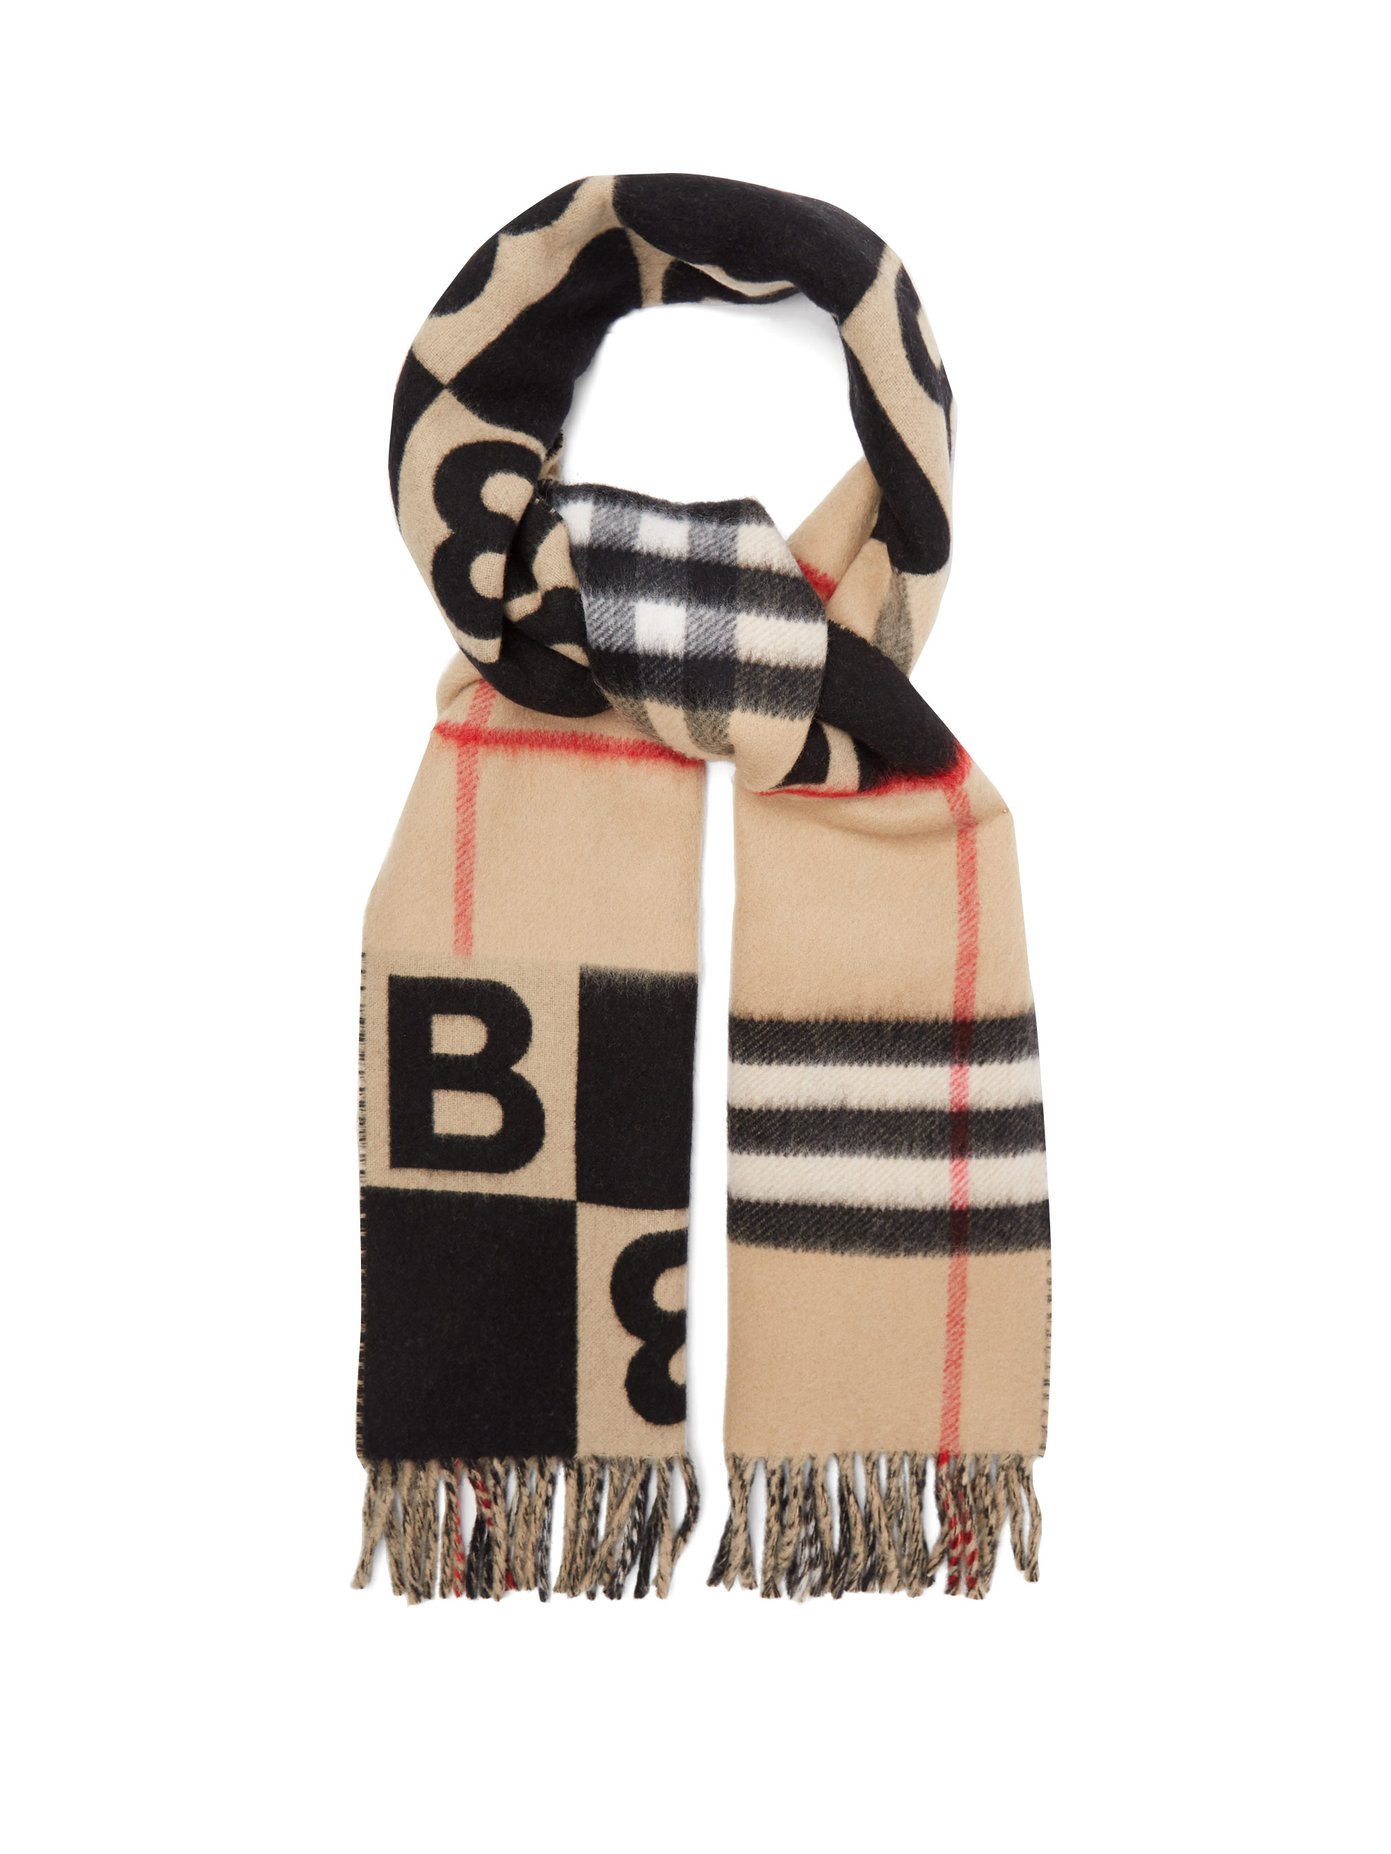 where can i buy a burberry scarf